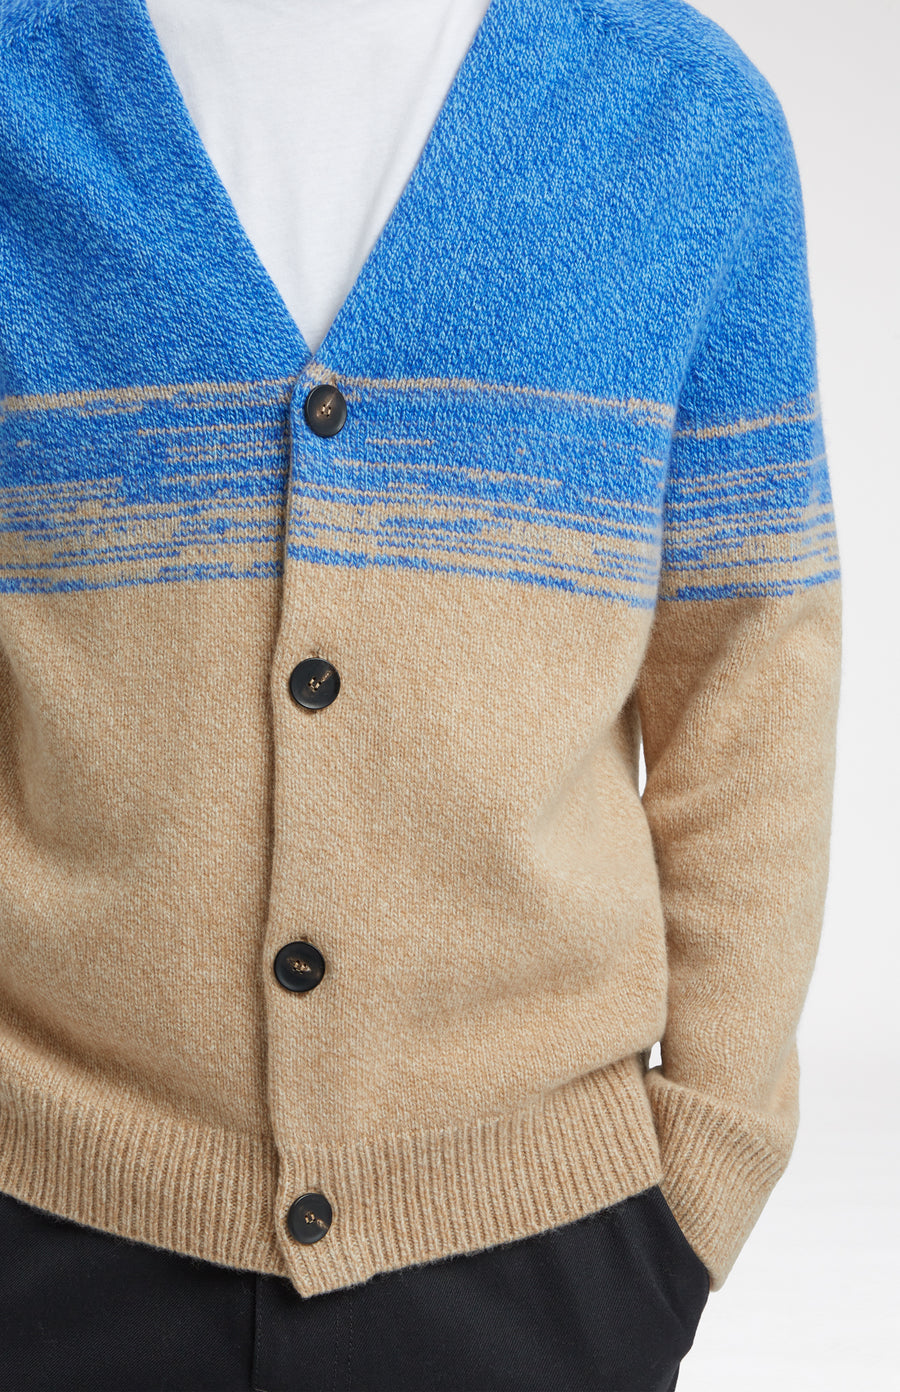 Lambswool V Neck Cardigan in Cobalt and Camel button detail - Pringle of Scotland 